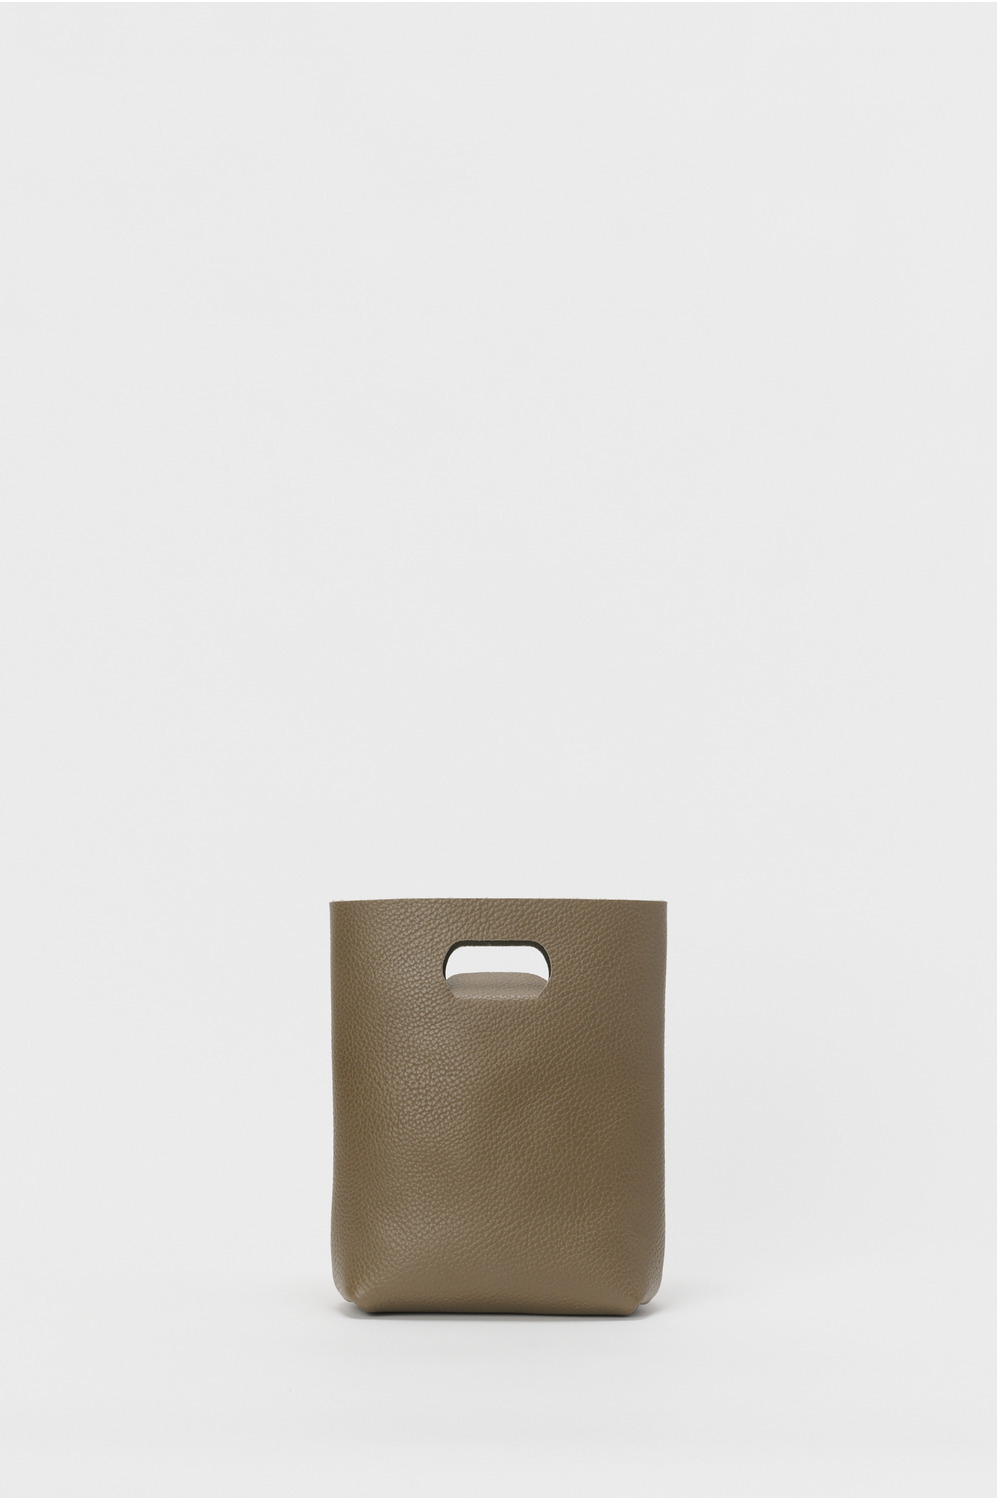 not eco bag small 詳細画像 taupe 1